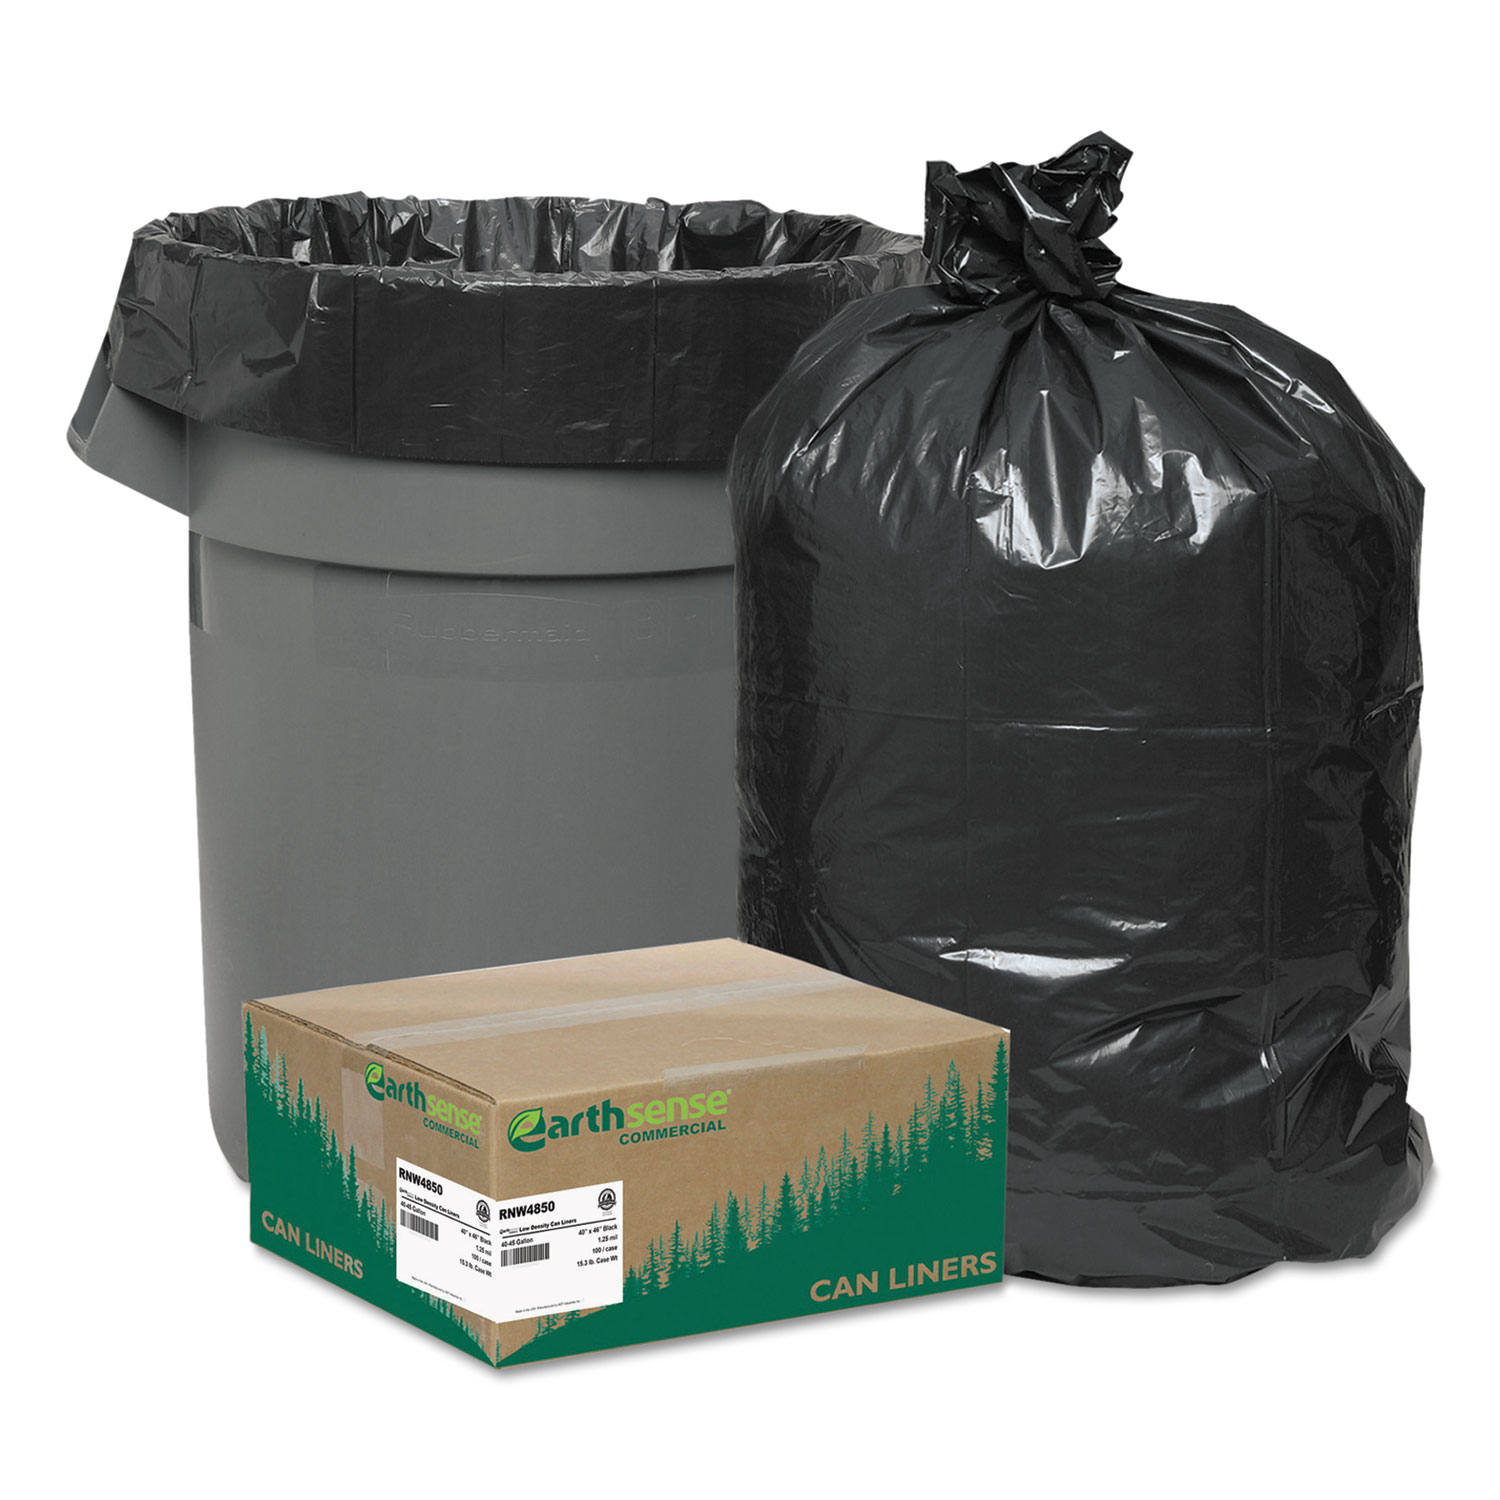  Earthsense Commercial RNW4850 Linear Low Density Recycled Can Liners, 45 gal, 1.25 mil, 40 x 46, Black, 100/Carton (WBIRNW4850) 